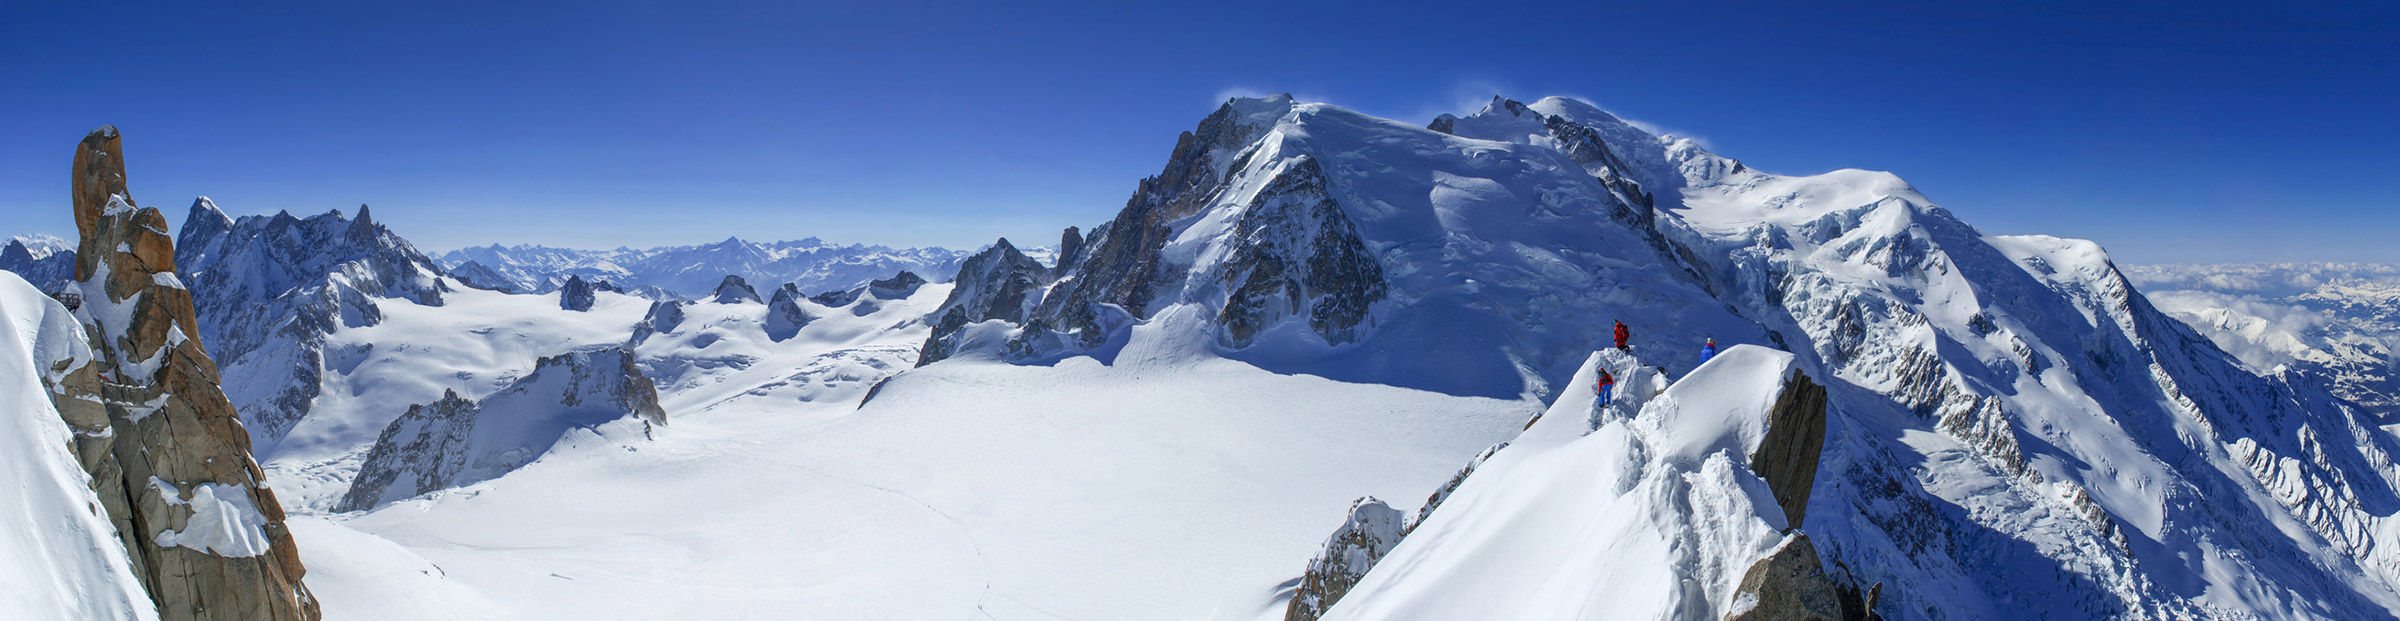 Sale of apartments in Chamonix and Les Houches with your real estate agency Chevallier Immobilier